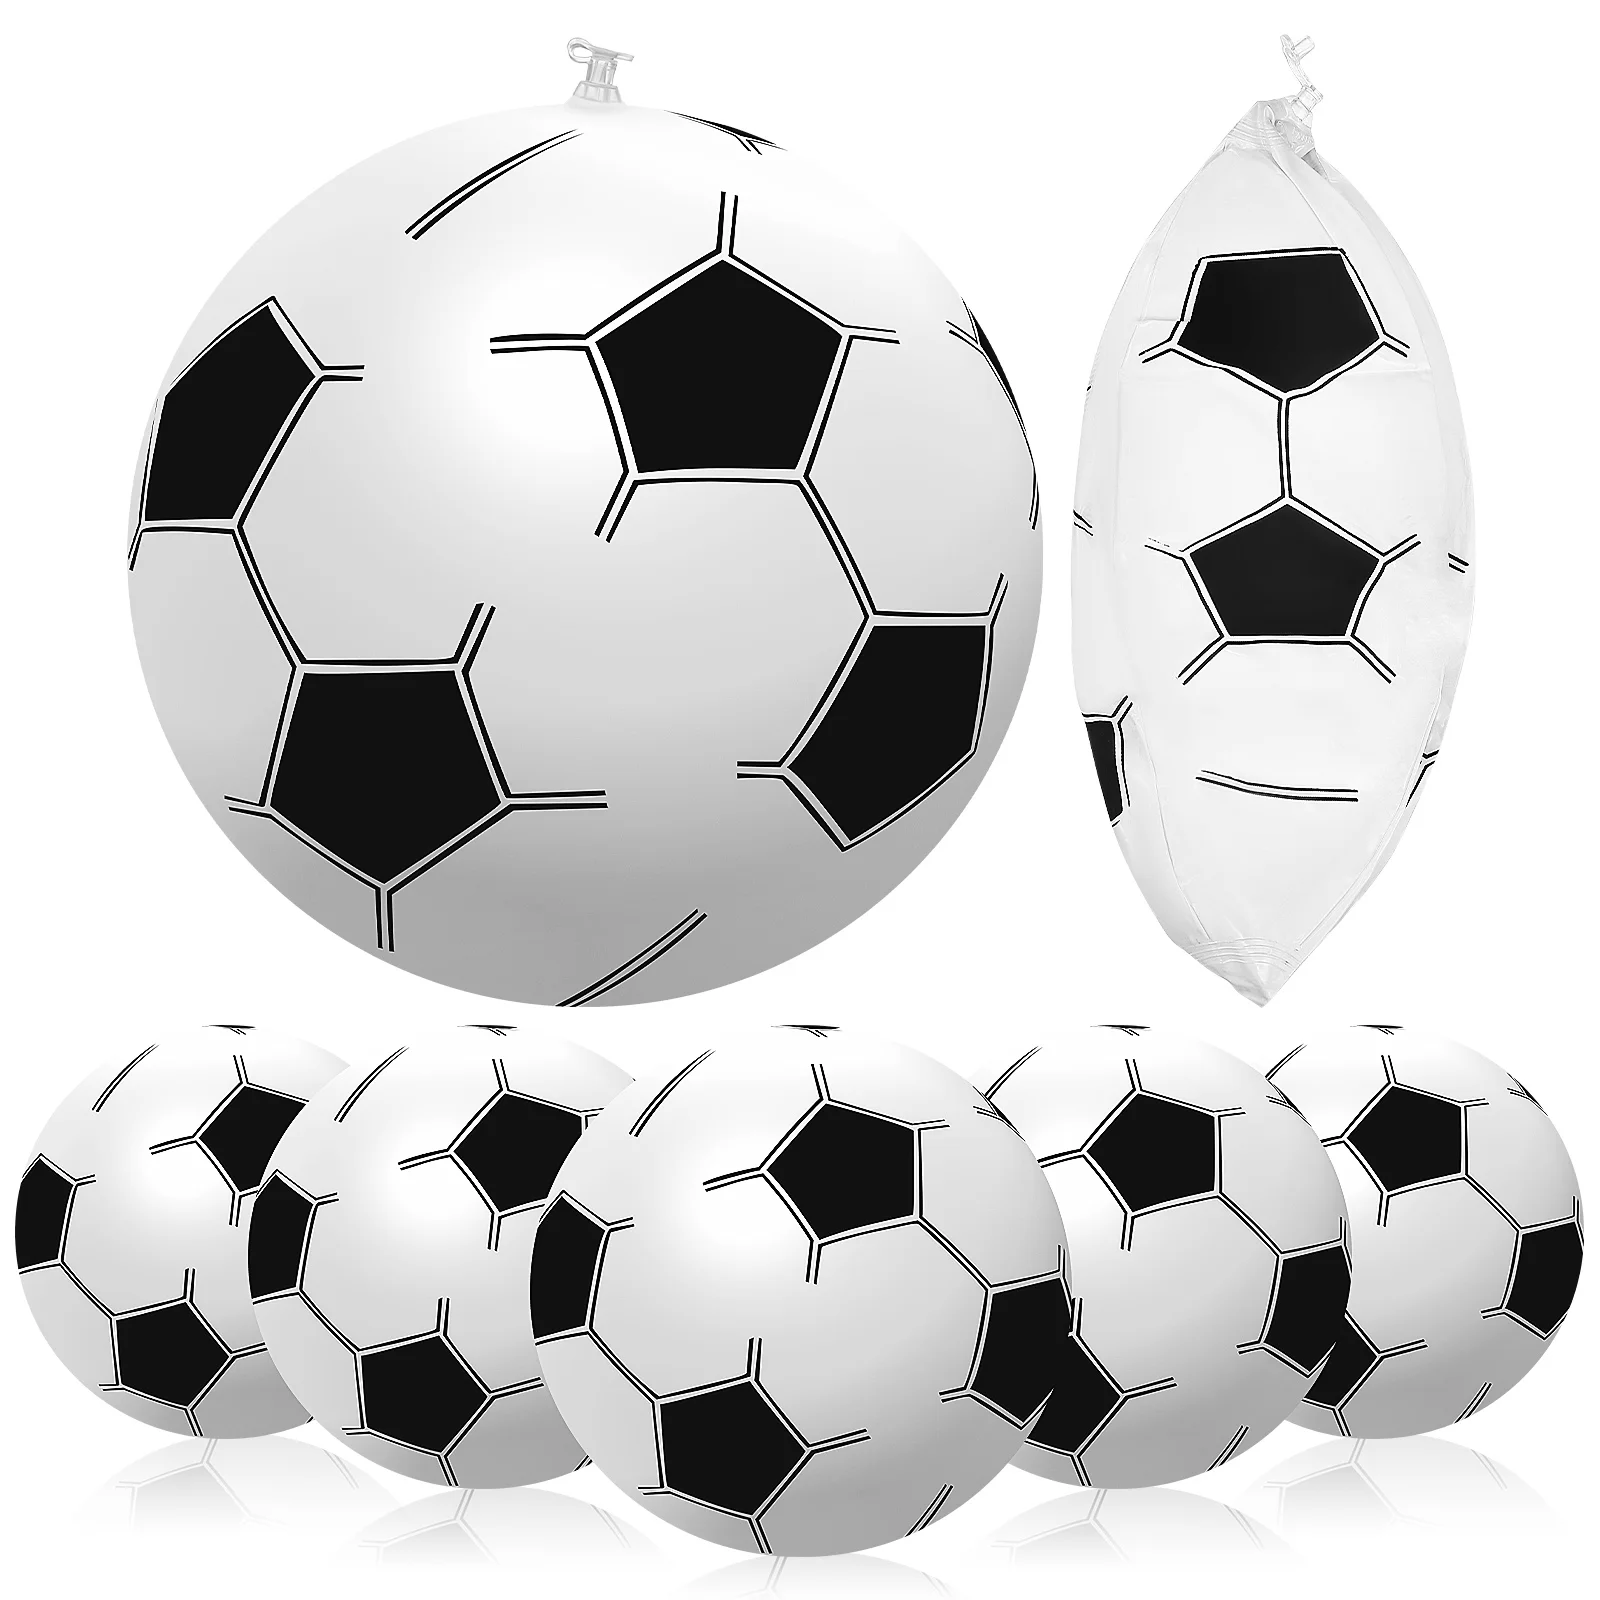 

6 Pcs Toy Football Inflatable Beach Balls Soccer Toys Bouncy Outdoor Playthings Kids' Footballs Pvc